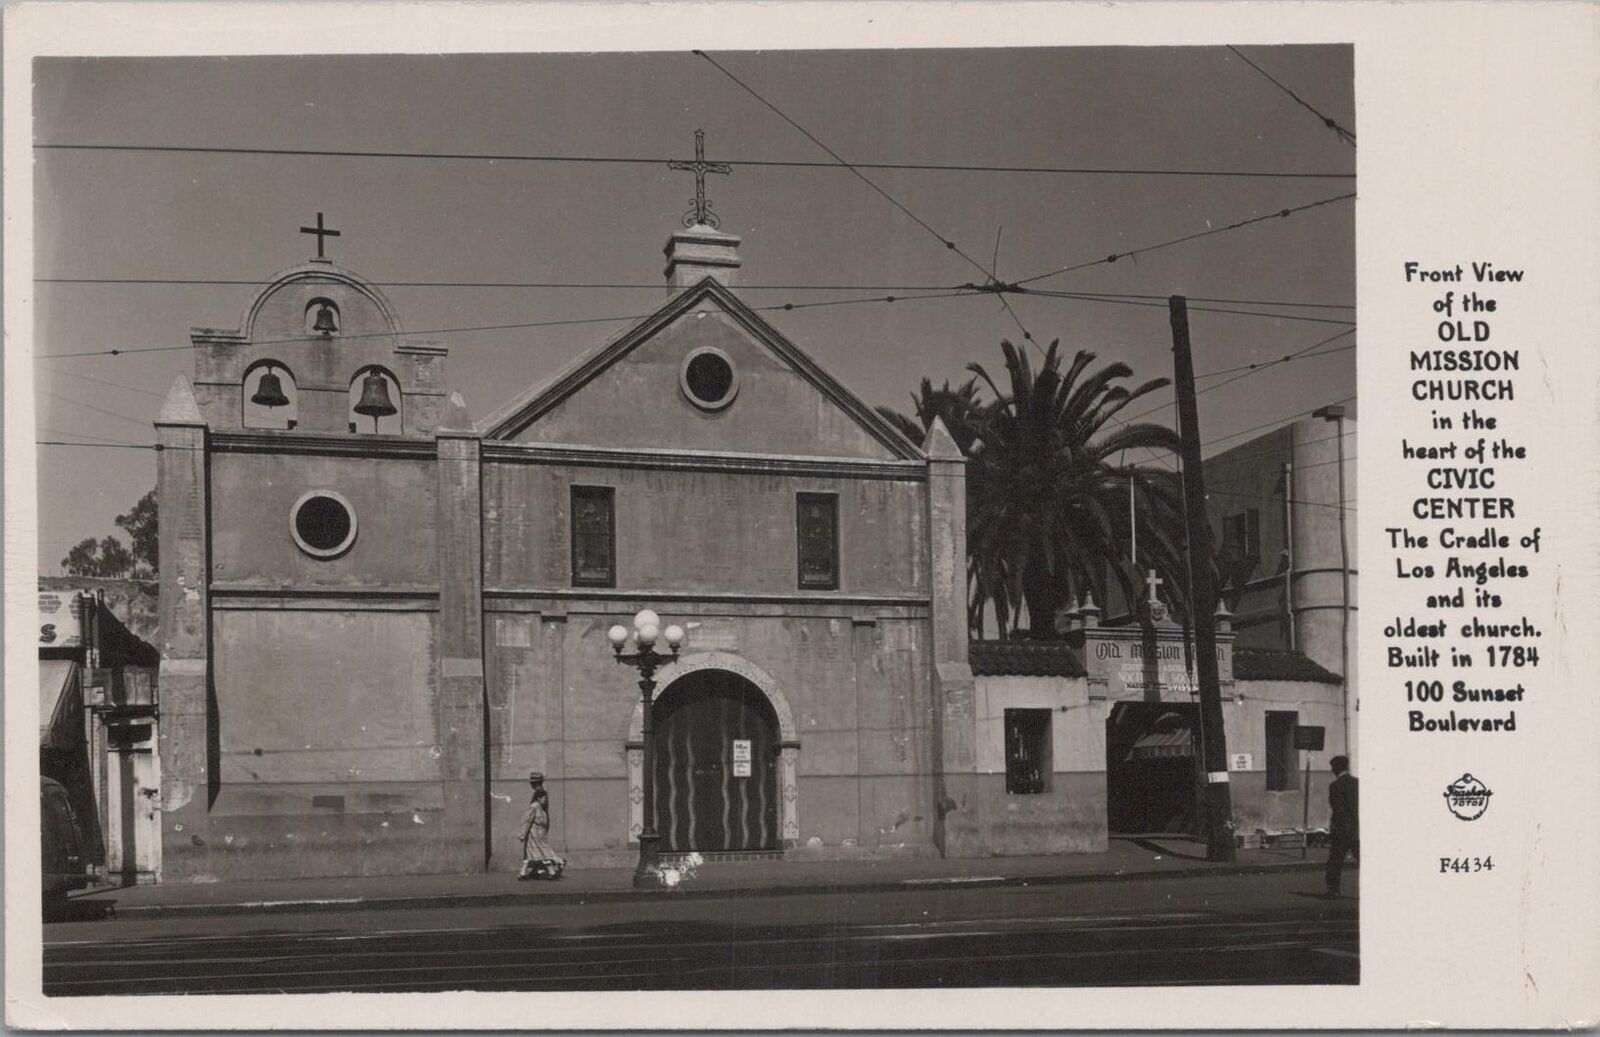 RPPC Postcard Front View Old Mission Church Civic Center Los Angeles CA 